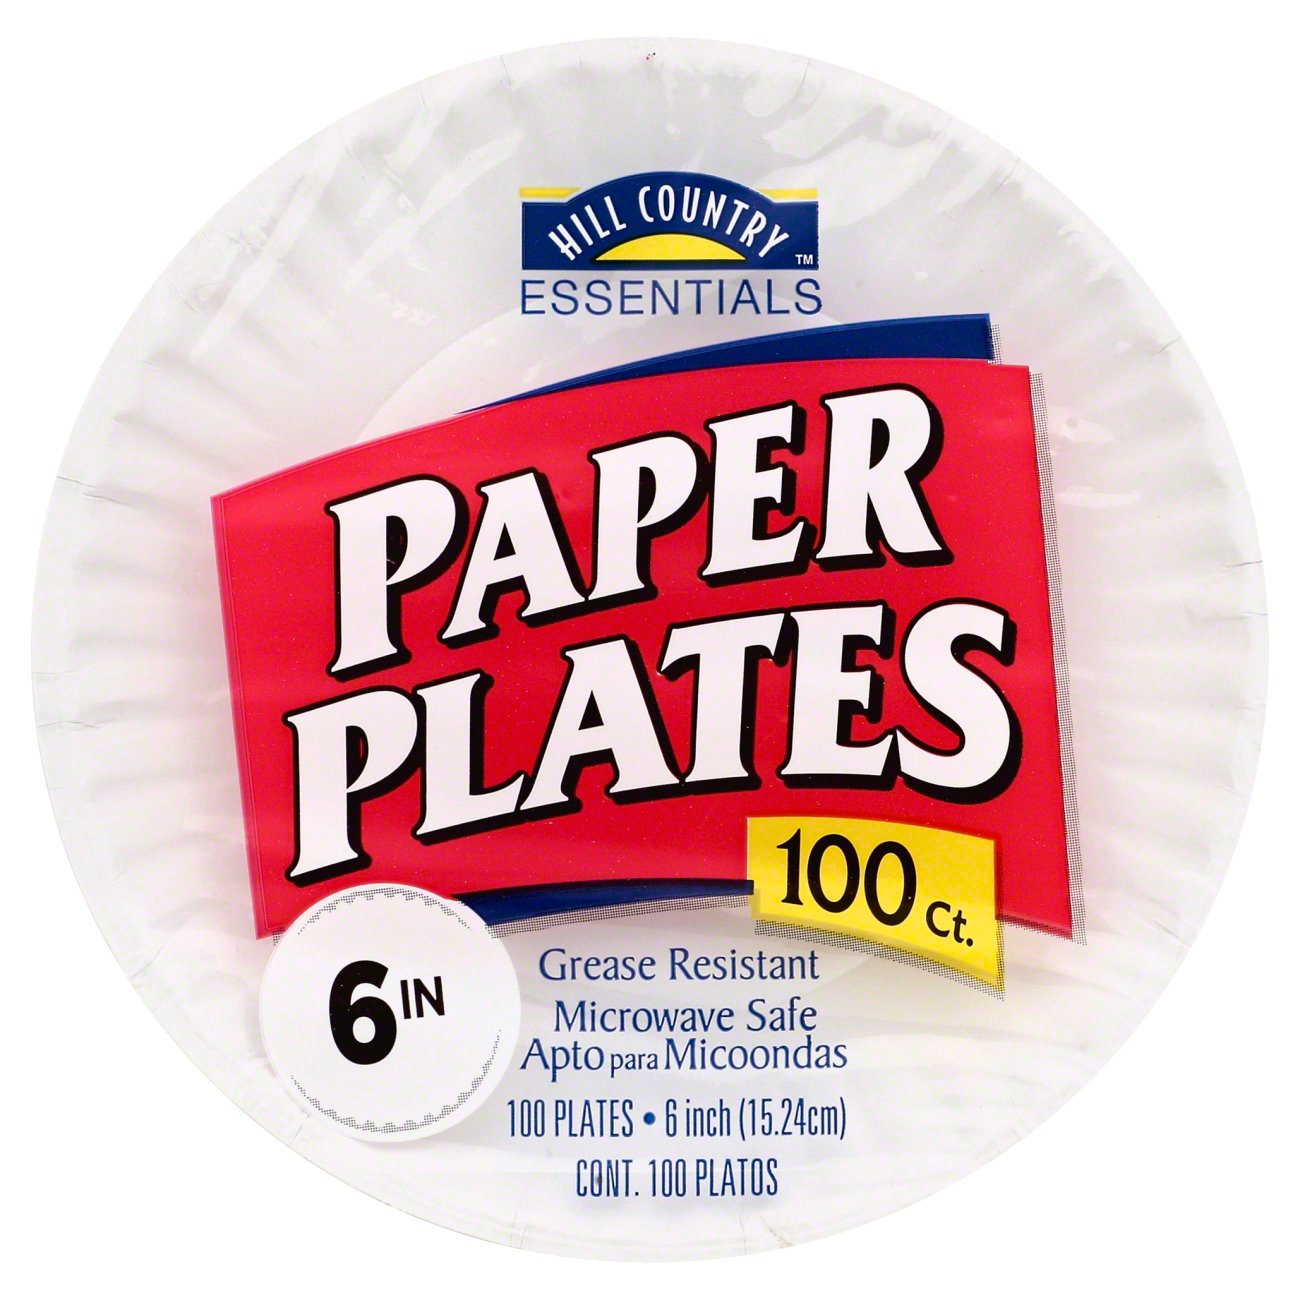 Hill Country Essentials 6 in Paper Plates - Shop Plates & Bowls at H-E-B